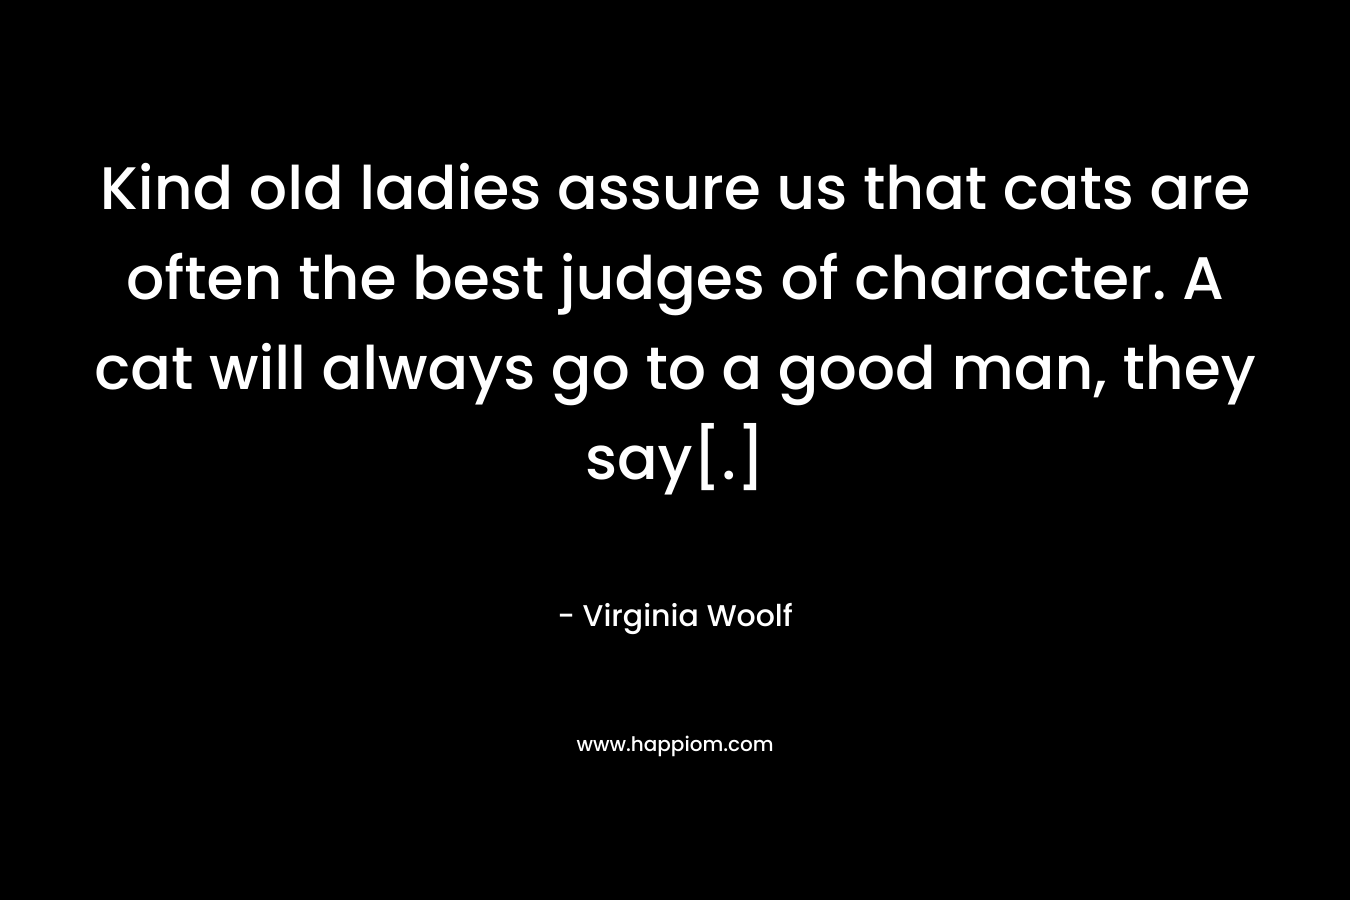 Kind old ladies assure us that cats are often the best judges of character. A cat will always go to a good man, they say[.]